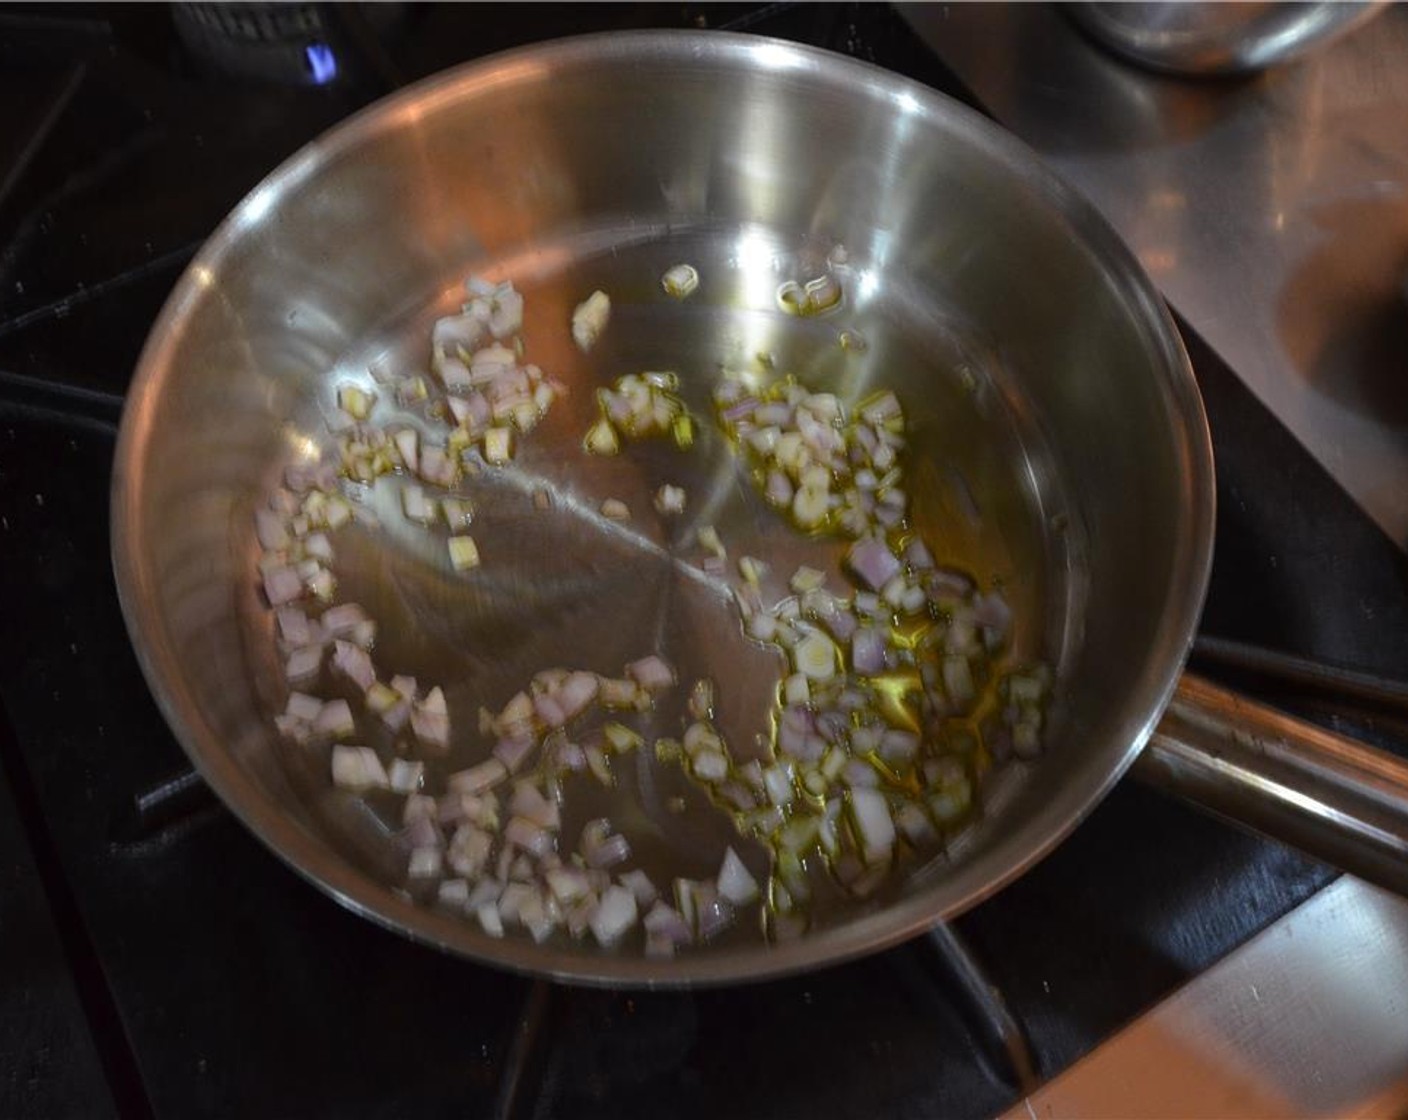 step 4 In a stainless steel sauté pan placed over low heat, sweat the Shallots (2 Tbsp) in Extra-Virgin Olive Oil (as needed) until tender.